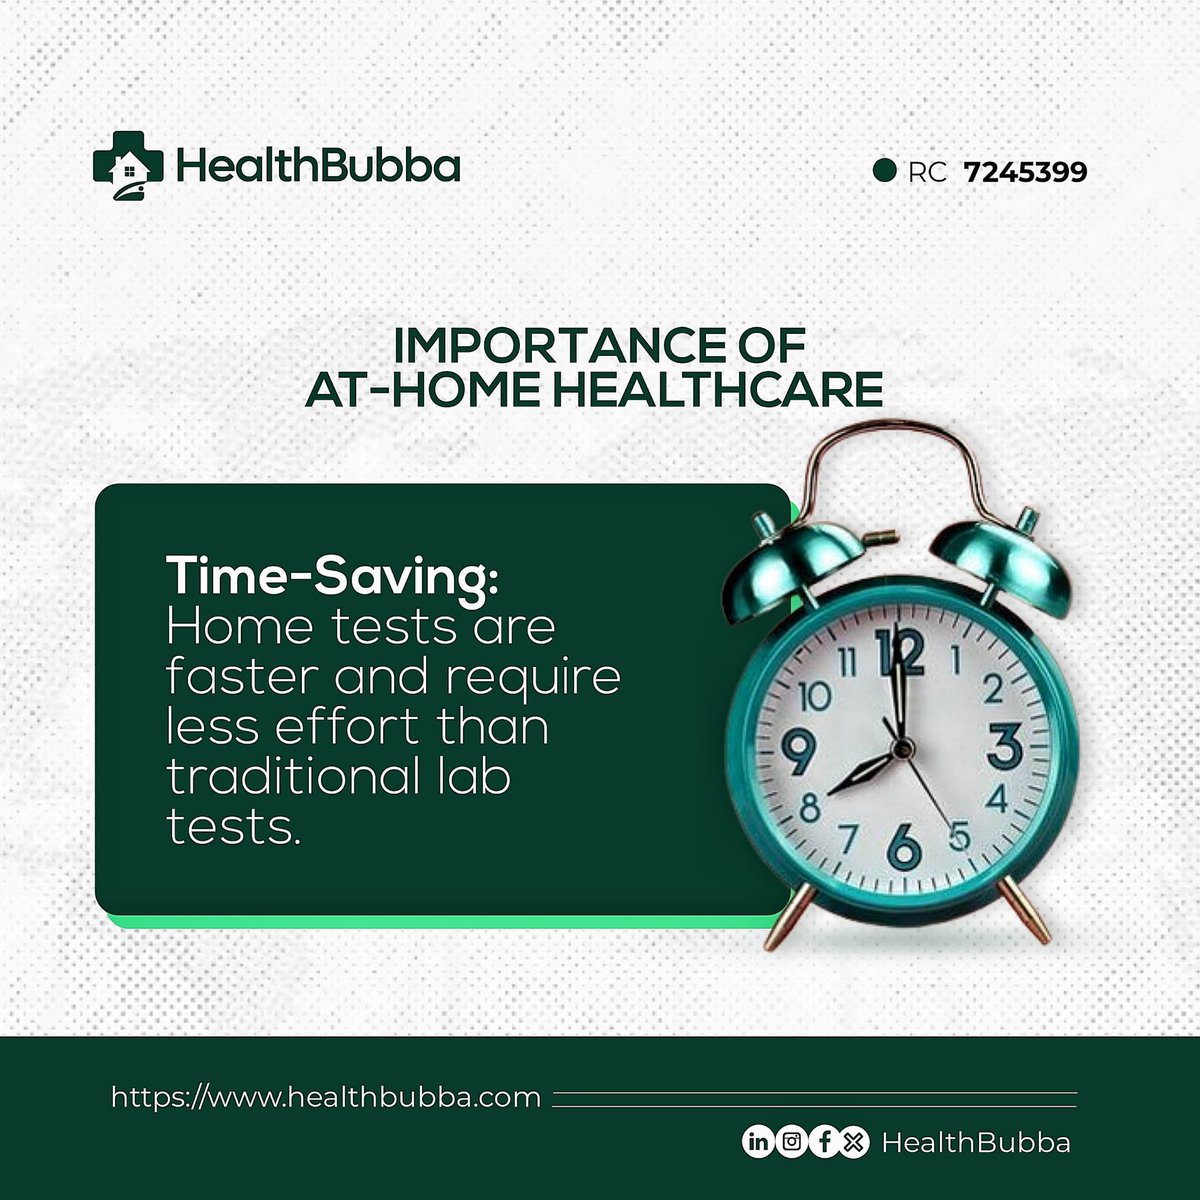 At-home health testing offers patients convenience, time- Saving and regular monitoring.

Something exciting is coming soon

#anticipate
#healthinnovation
#healthcare
#athomehealthcare
#testathome